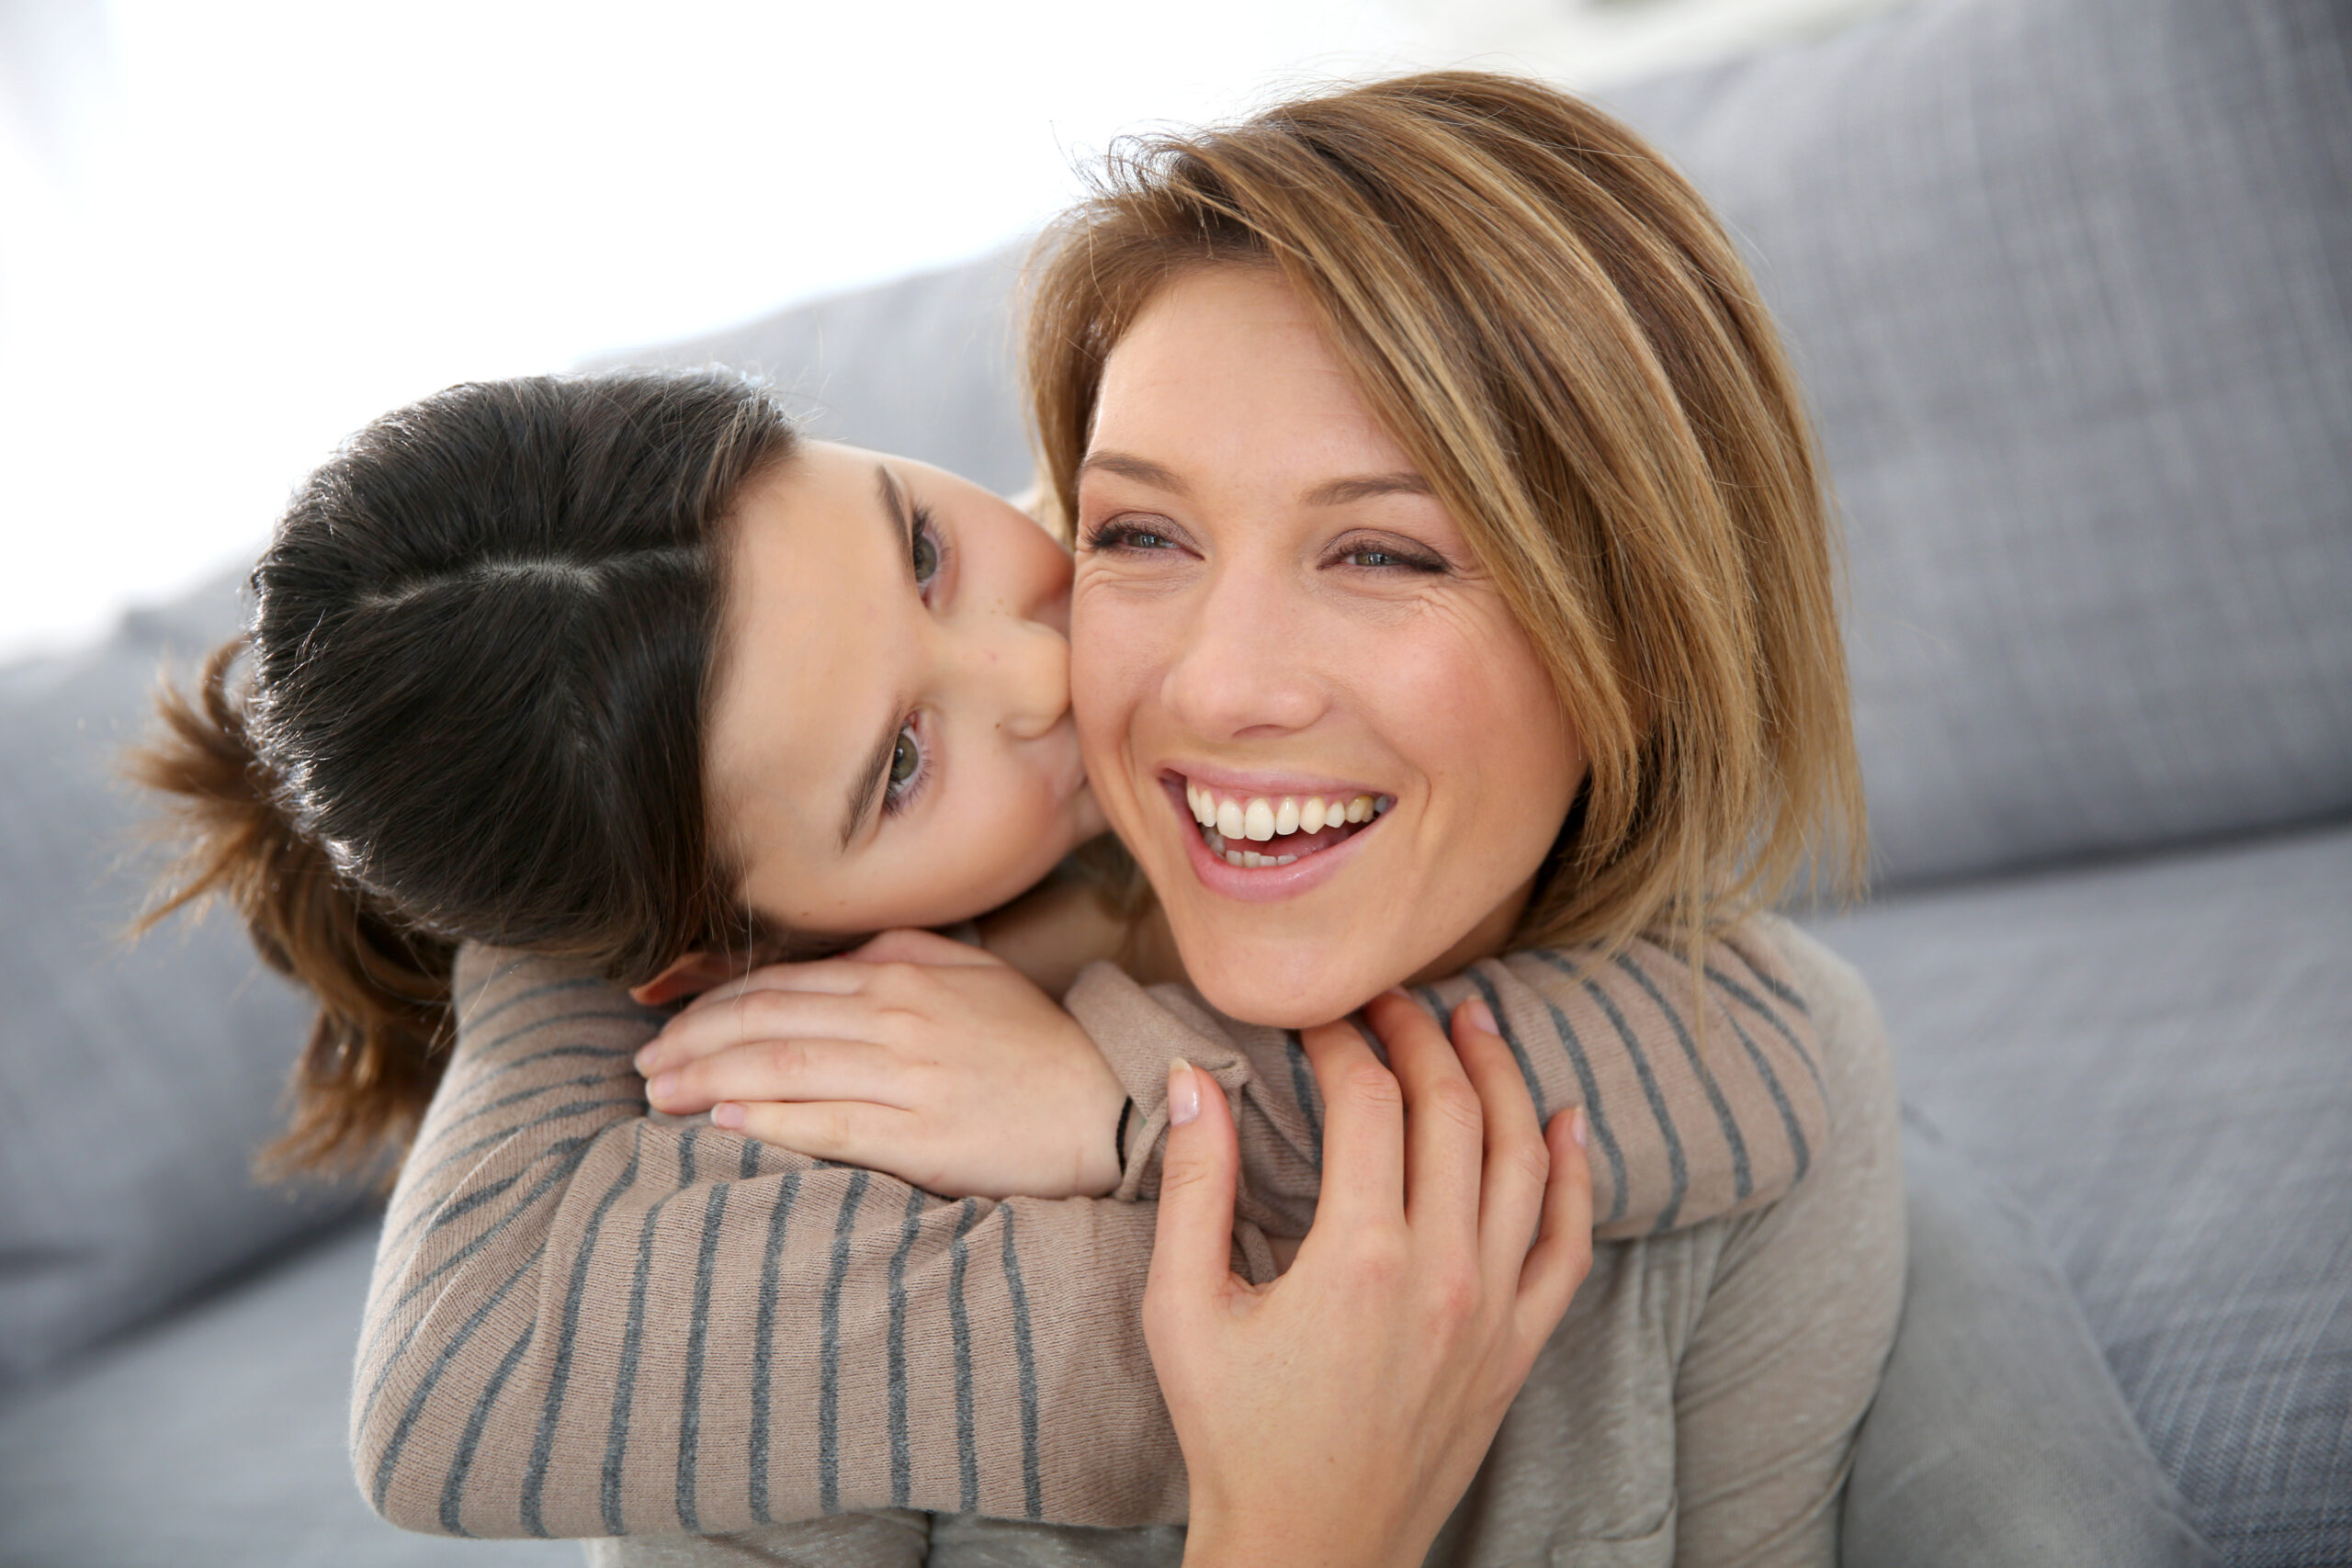 A girl hugs and kisses her mom